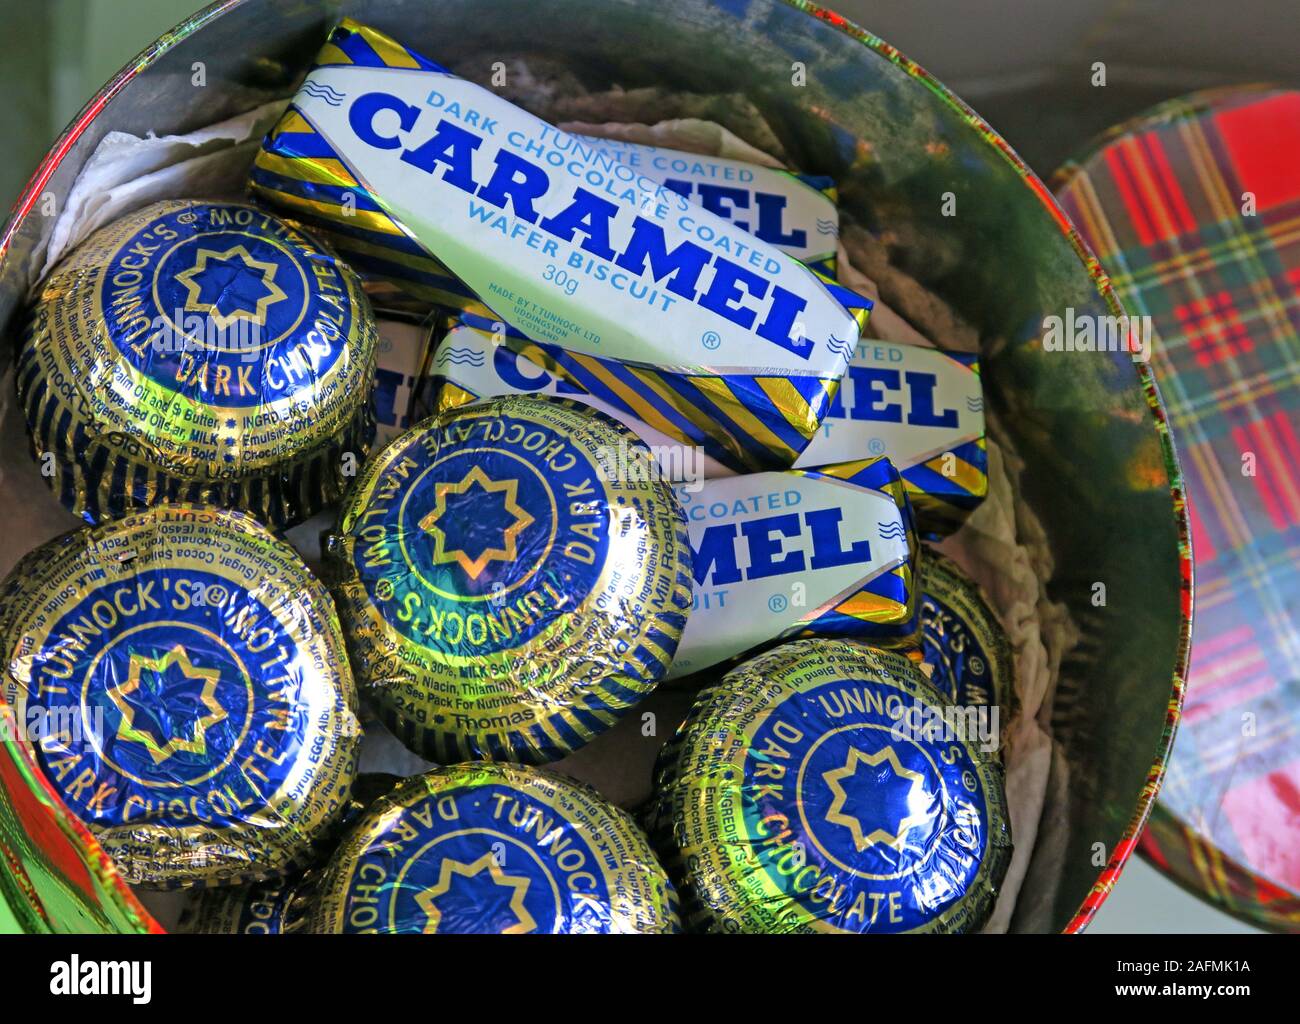 Tunnock's Dark Chocolate Caramel Wafers and Tunnock's Dark Chocolate Teacakes, in a tartan tin. Soft marshmallow biscuits,from Uddingston, Scotland Stock Photo